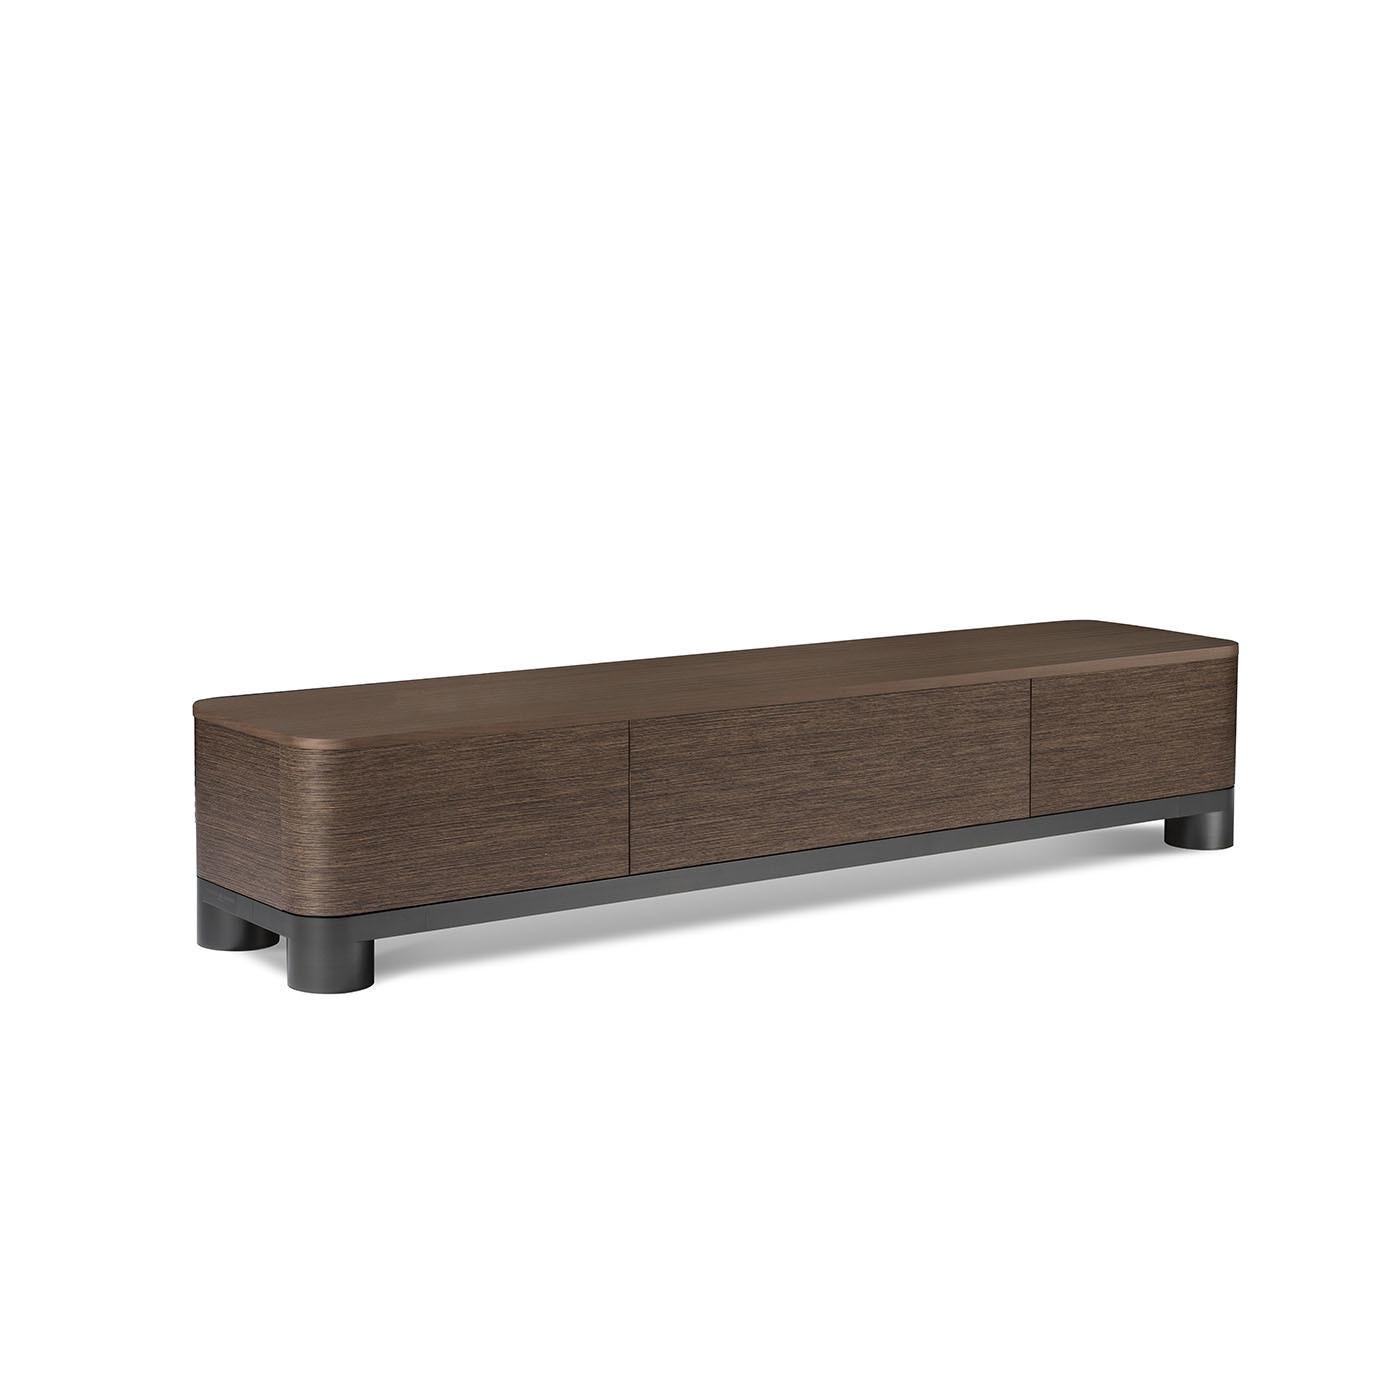 A modern interpretation of a classic design, this sideboard will make a timeless statement in any traditional or contemporary living room. Combining brass and wood, it rests on a black satin-finished base and a hand-finished wooden structure with a